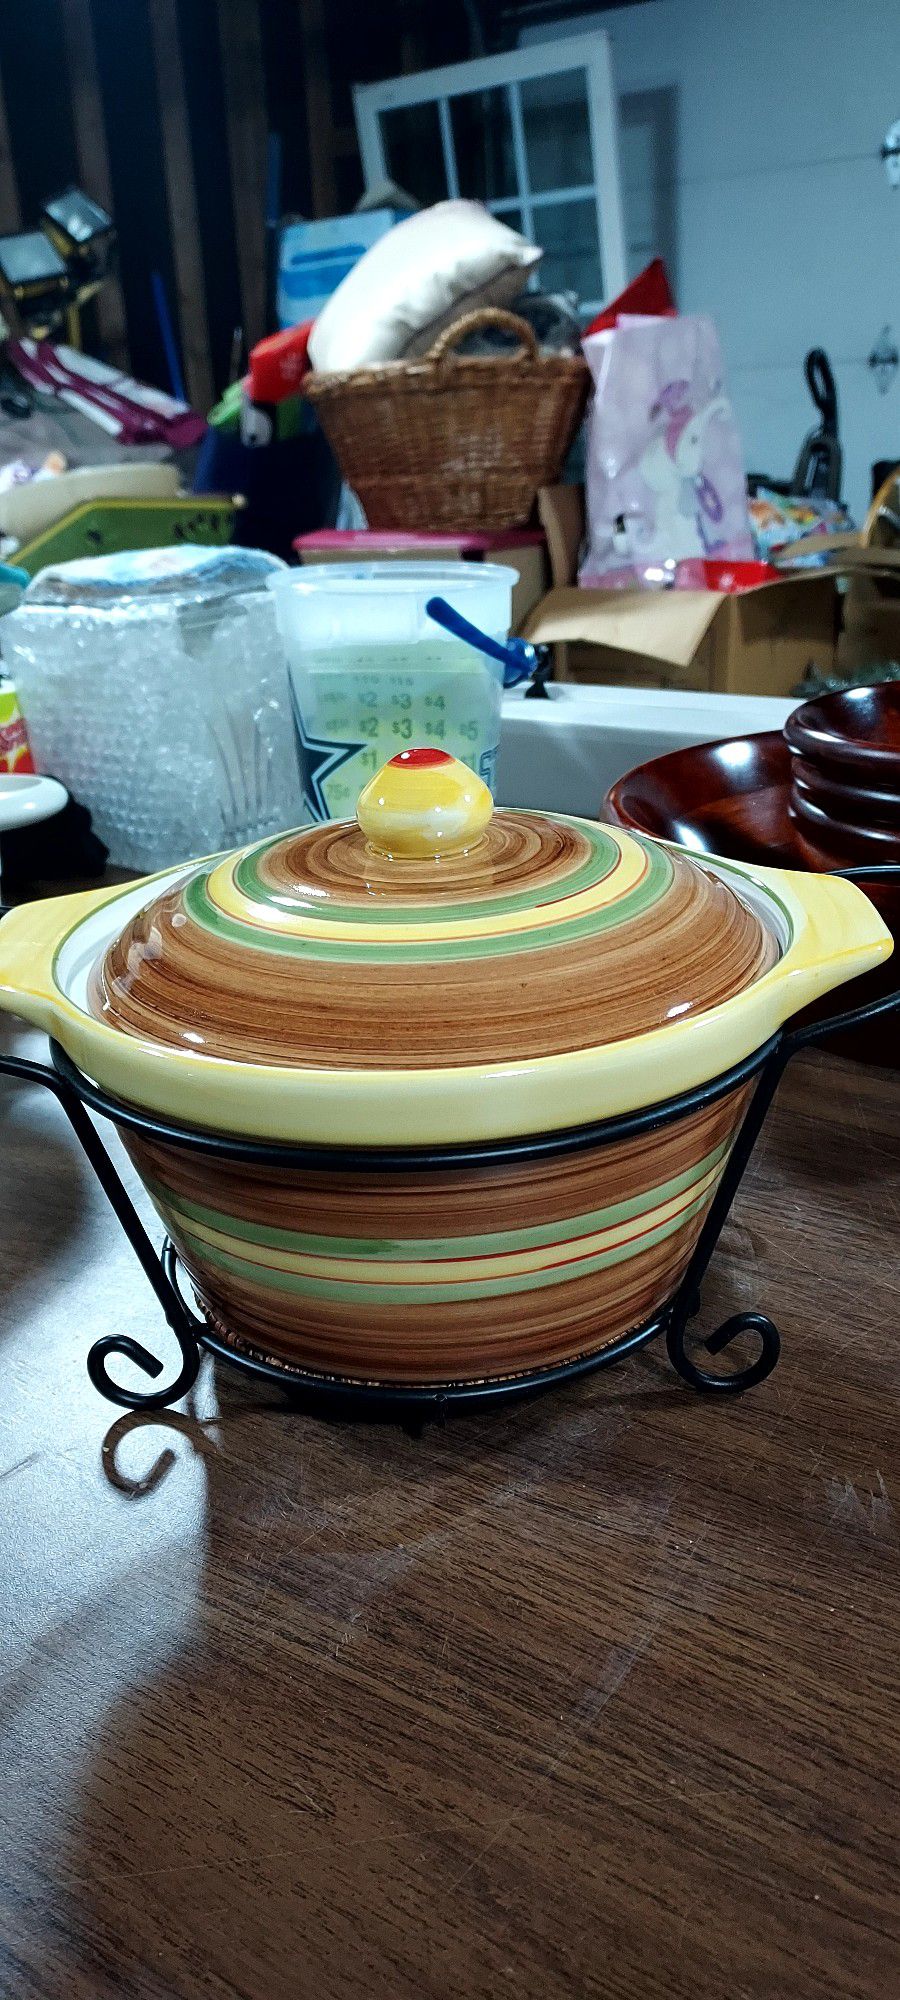 Temptations  Baking/Caserole Dish With Lid and Serving Stand